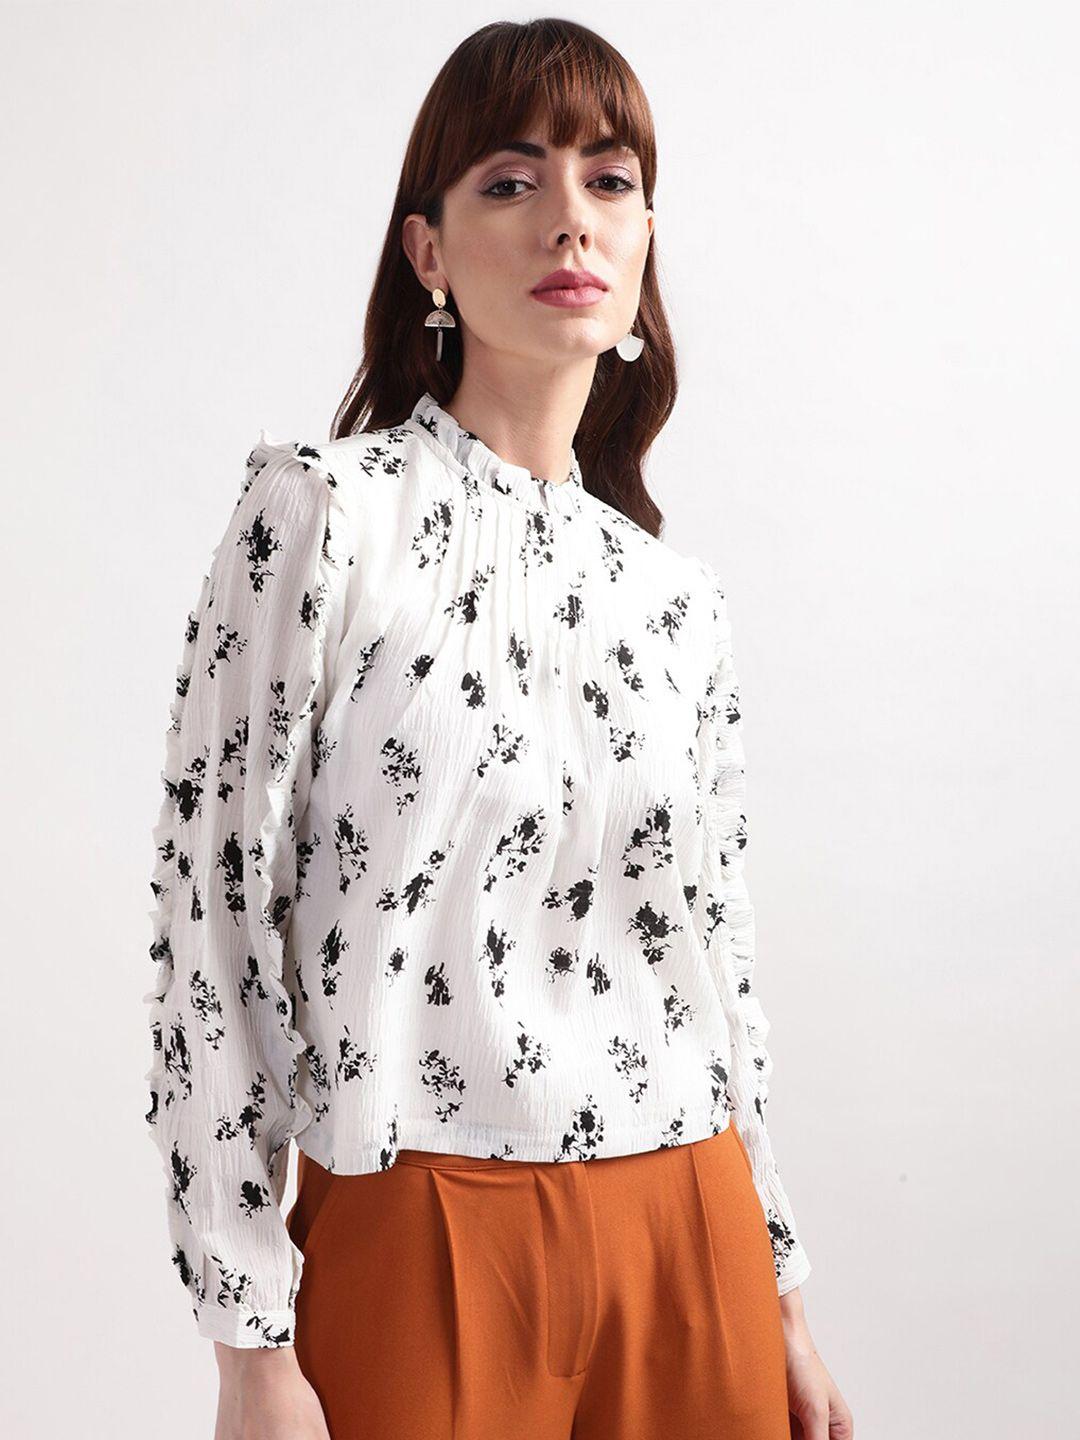 centrestage women white & black floral printed high neck top